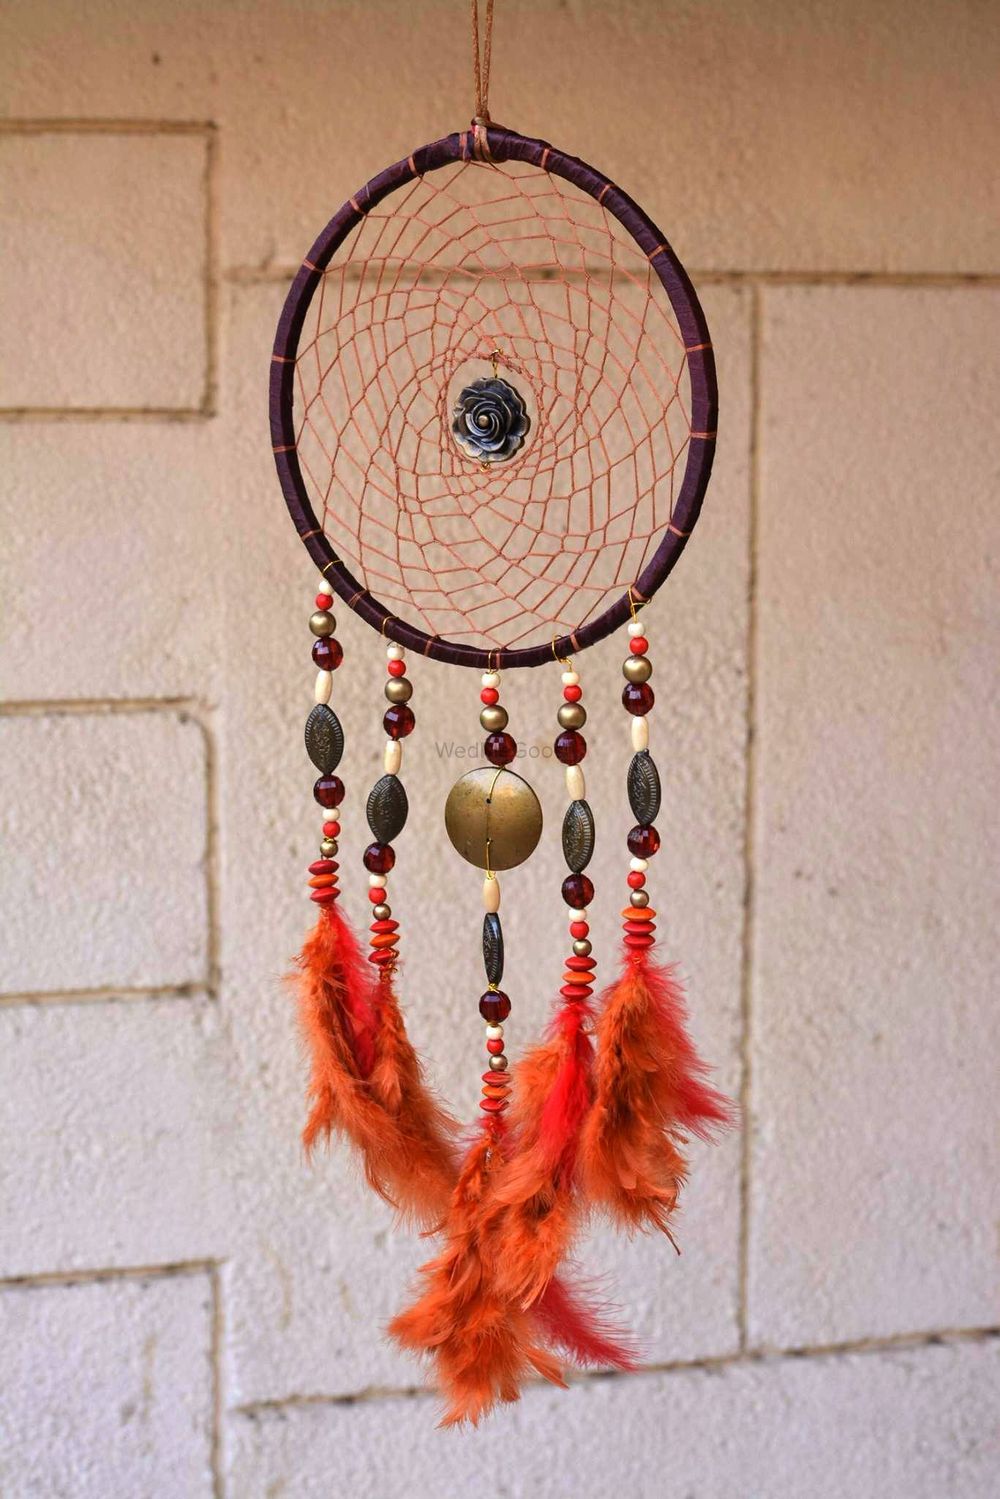 Photo From Dream Catchers - By Craft Leaves